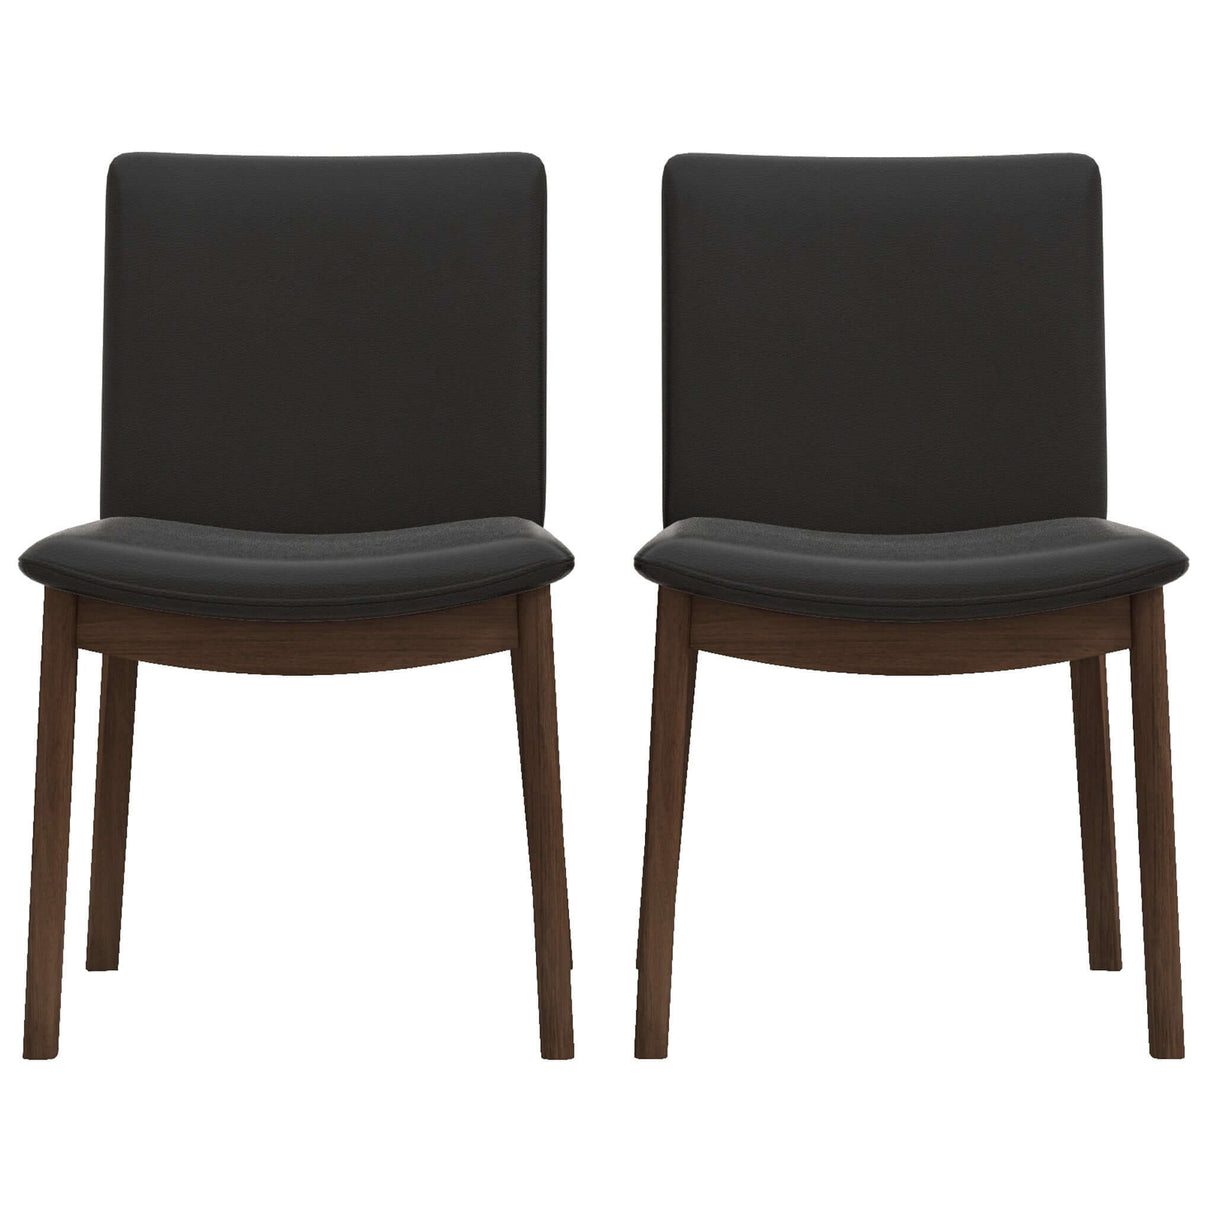 Laura Mid-Century Modern Solid Wood Dining Chair (Set of 2) Blue Linen